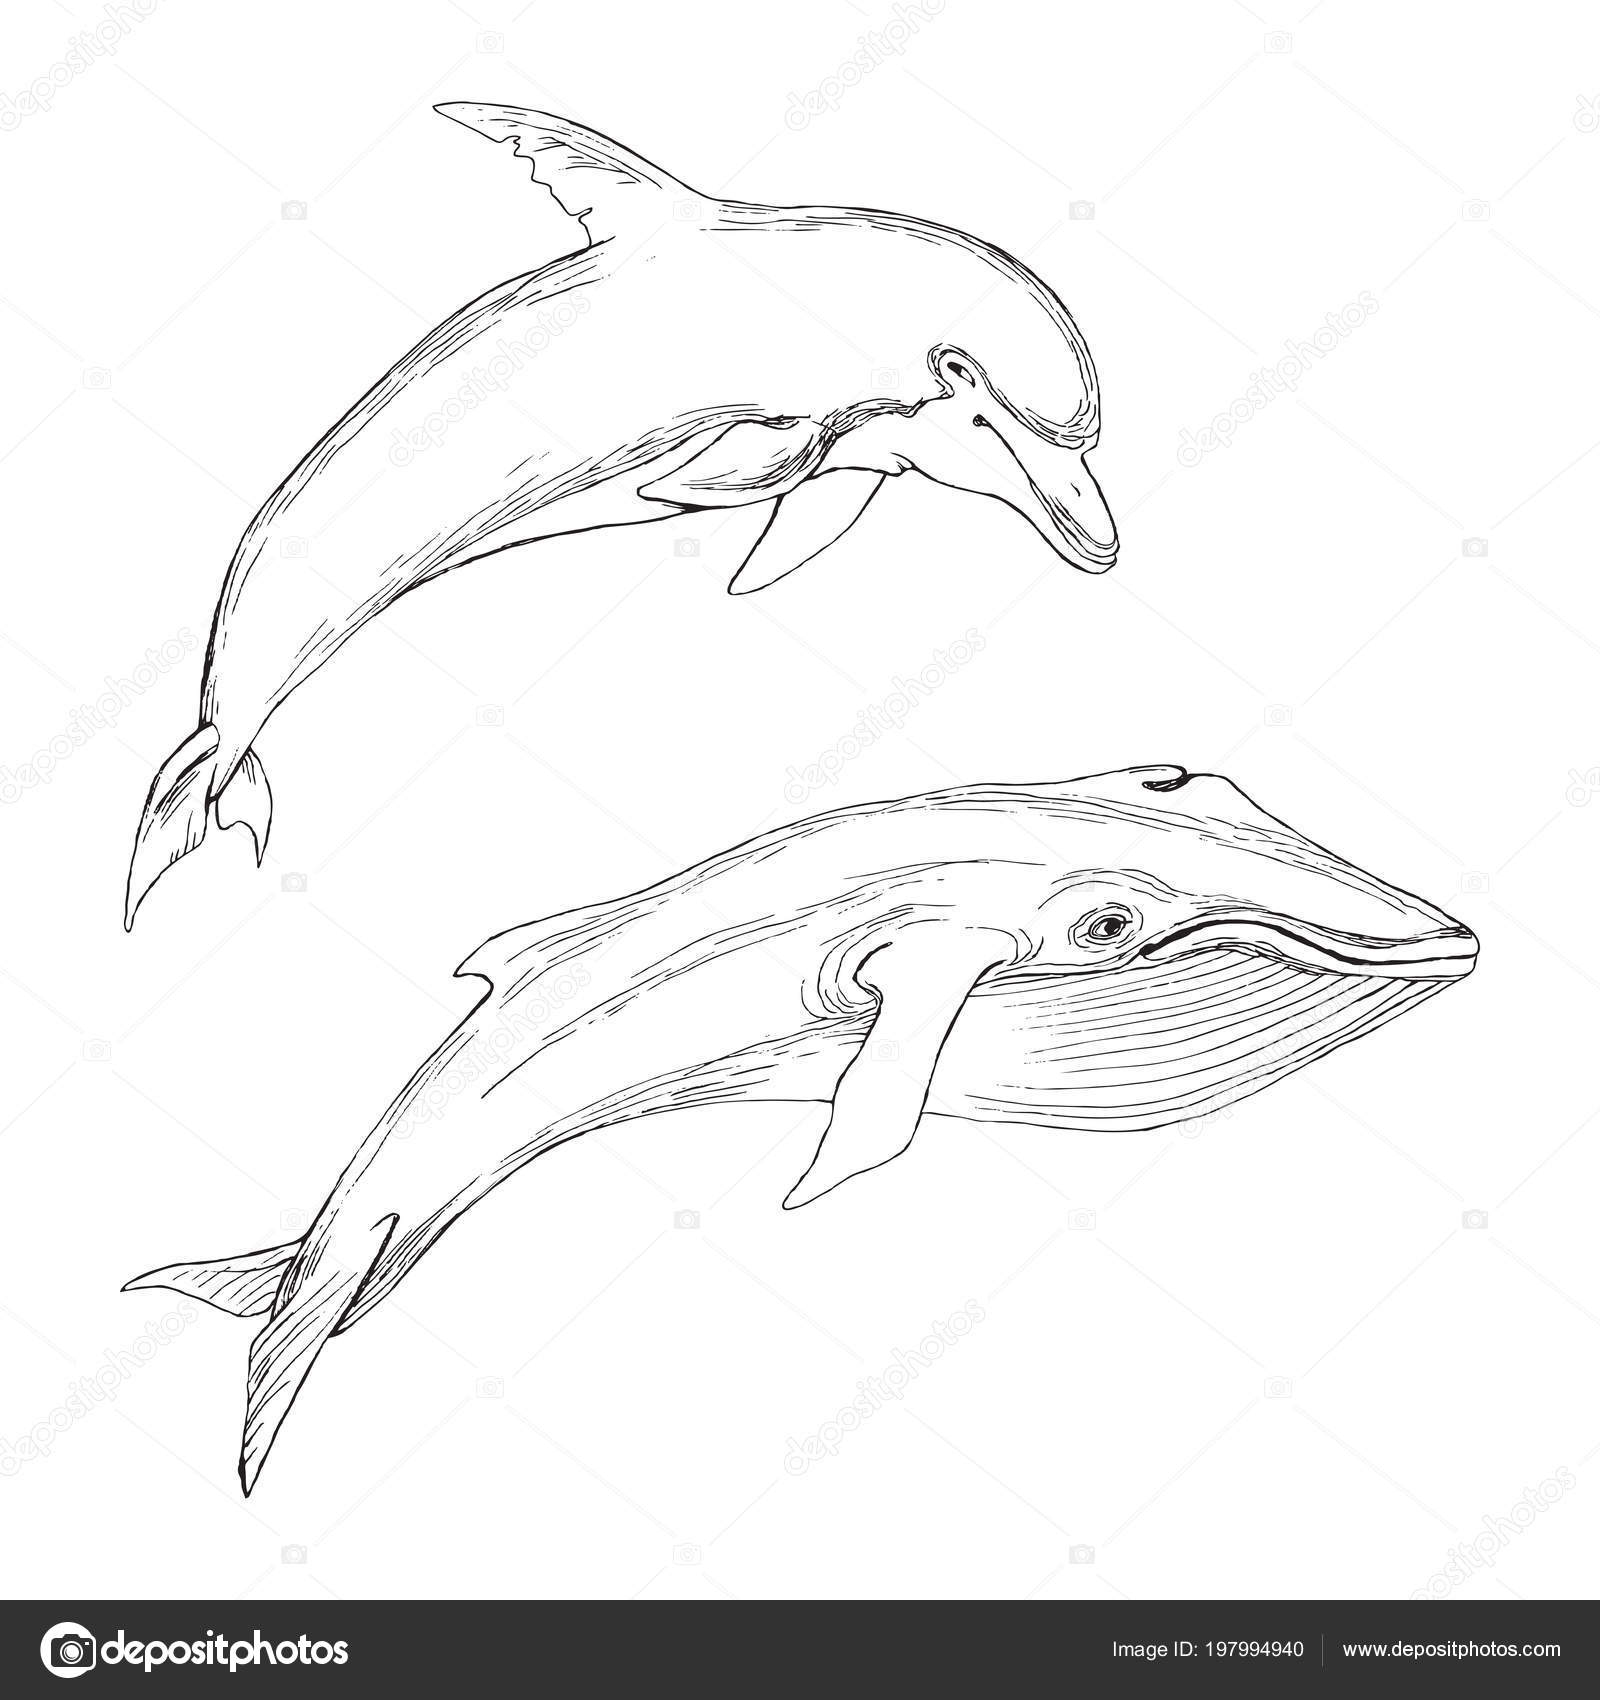 Common Dolphin line drawing by drknas on DeviantArt